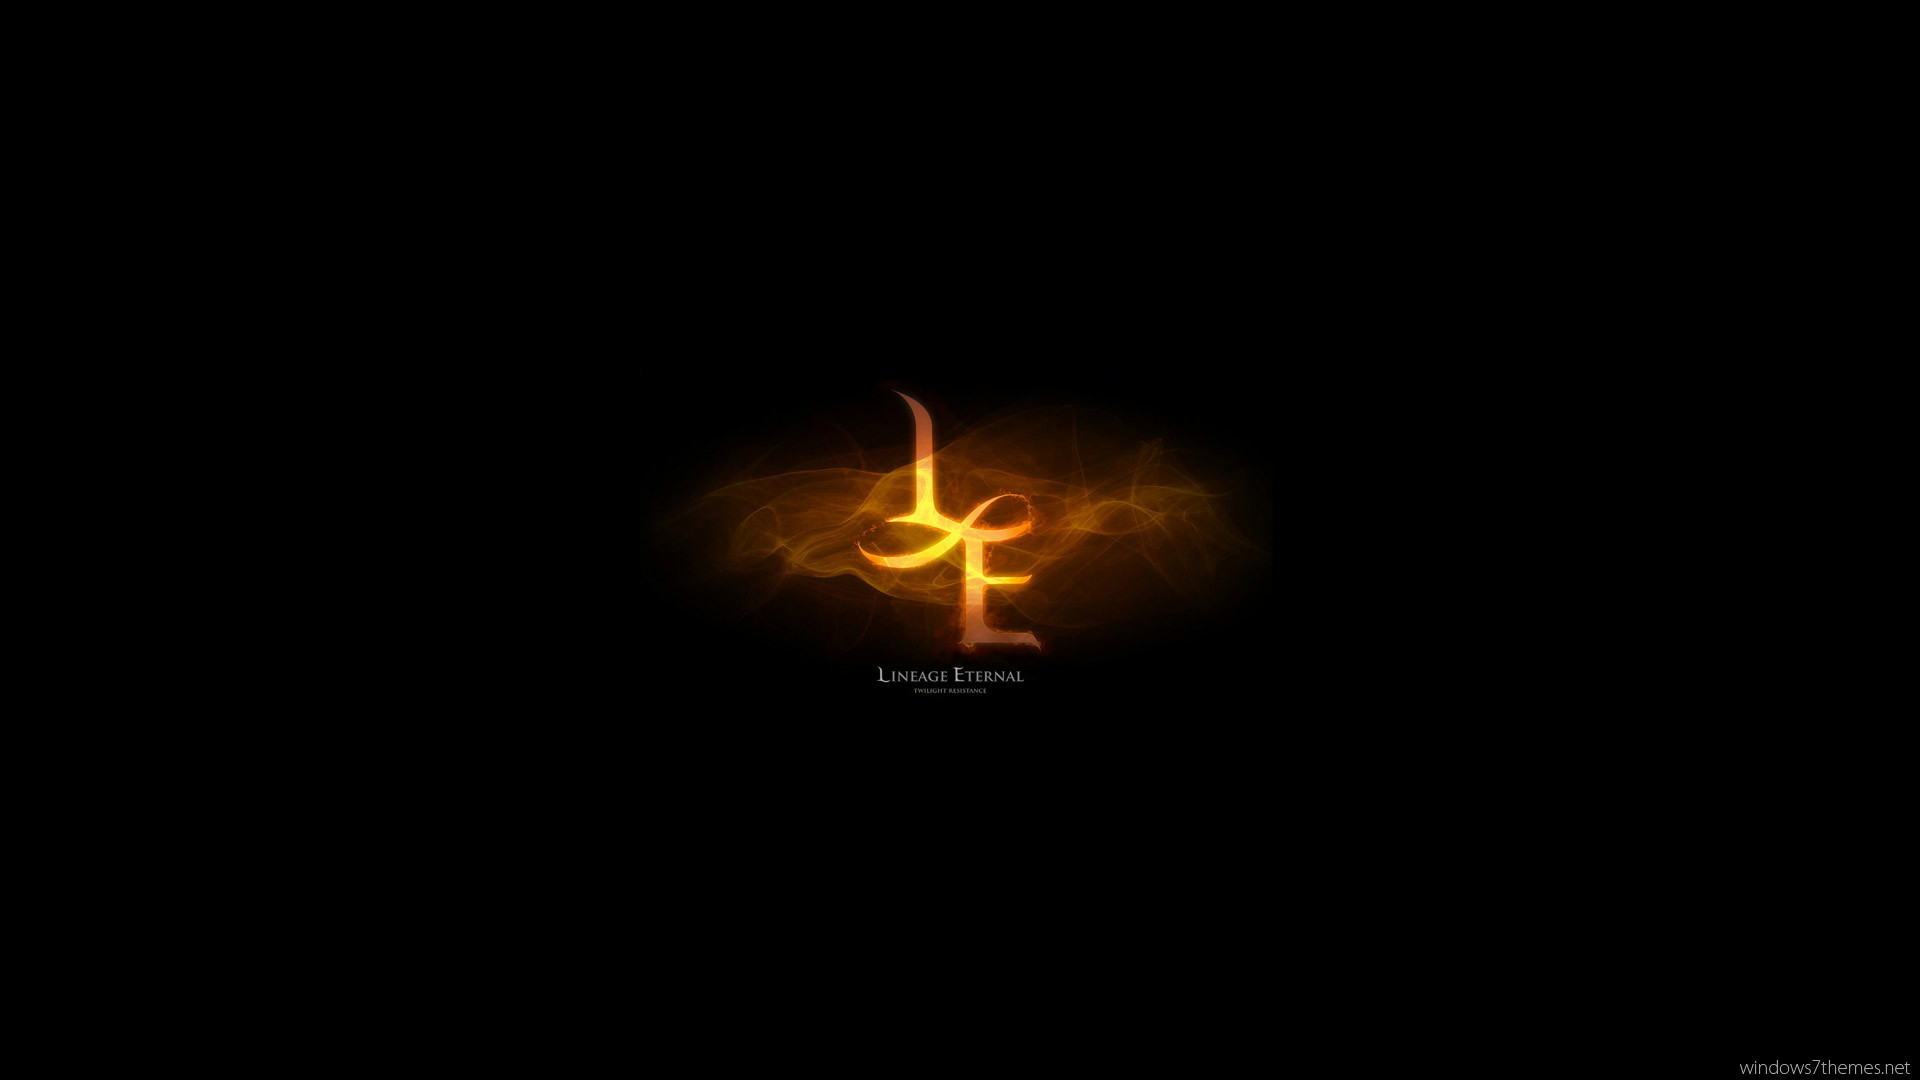 Download Lineage 3 Wallpaper 1920x1080